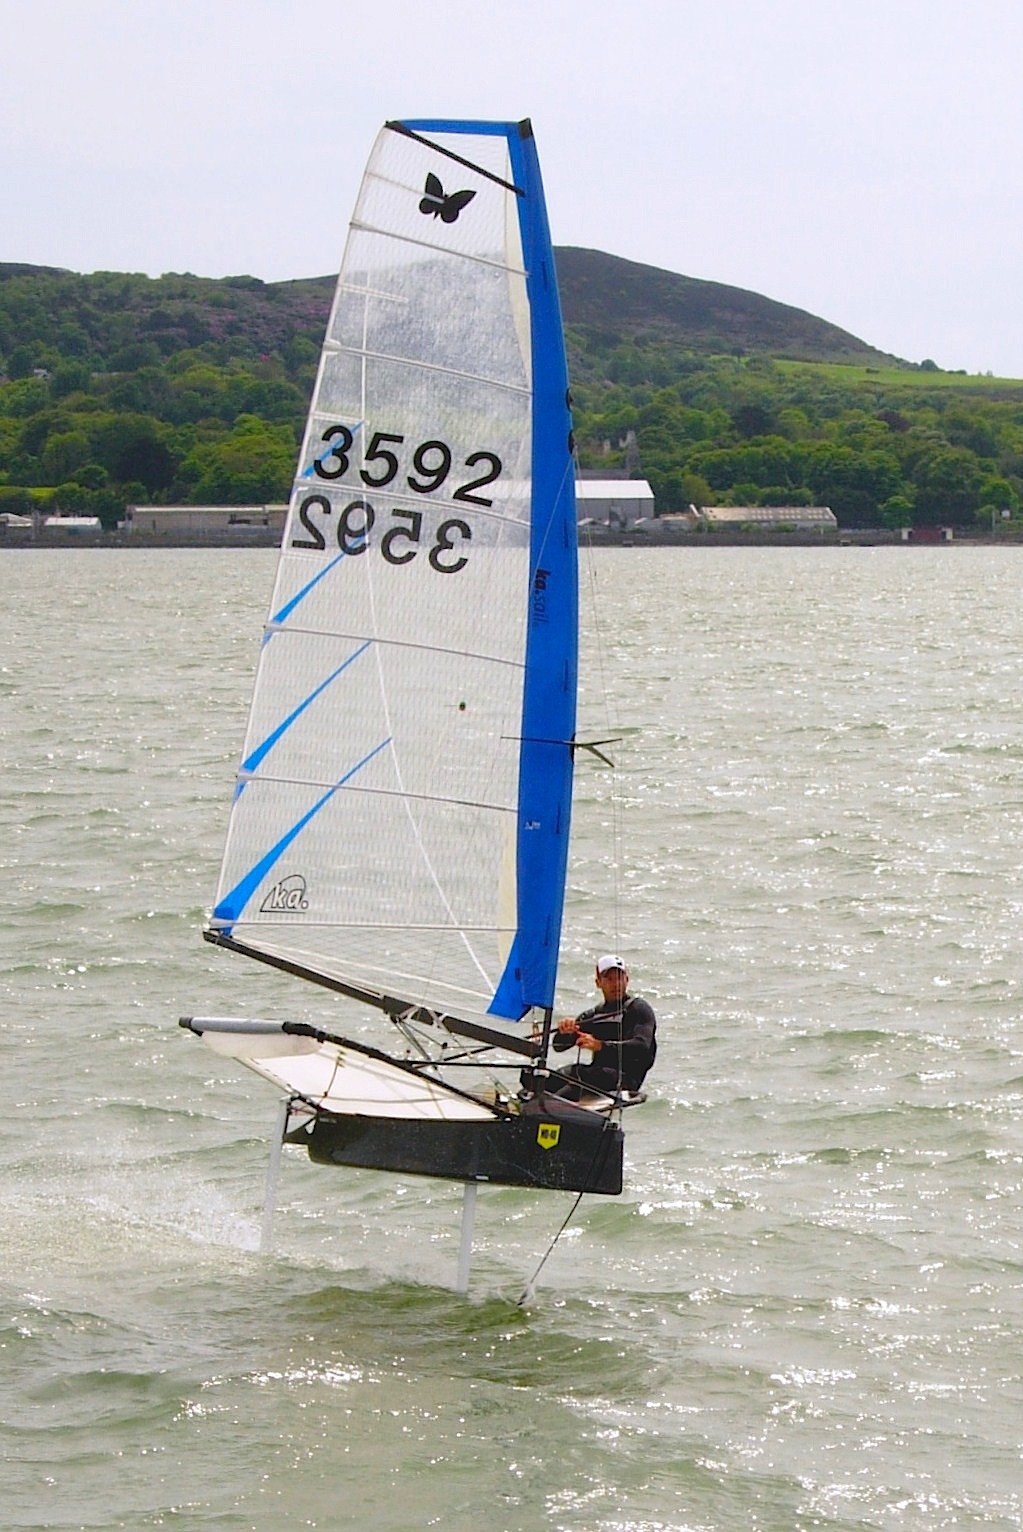 Rory Fitzpatrick shows how to 'foil' in front of Howth Pier